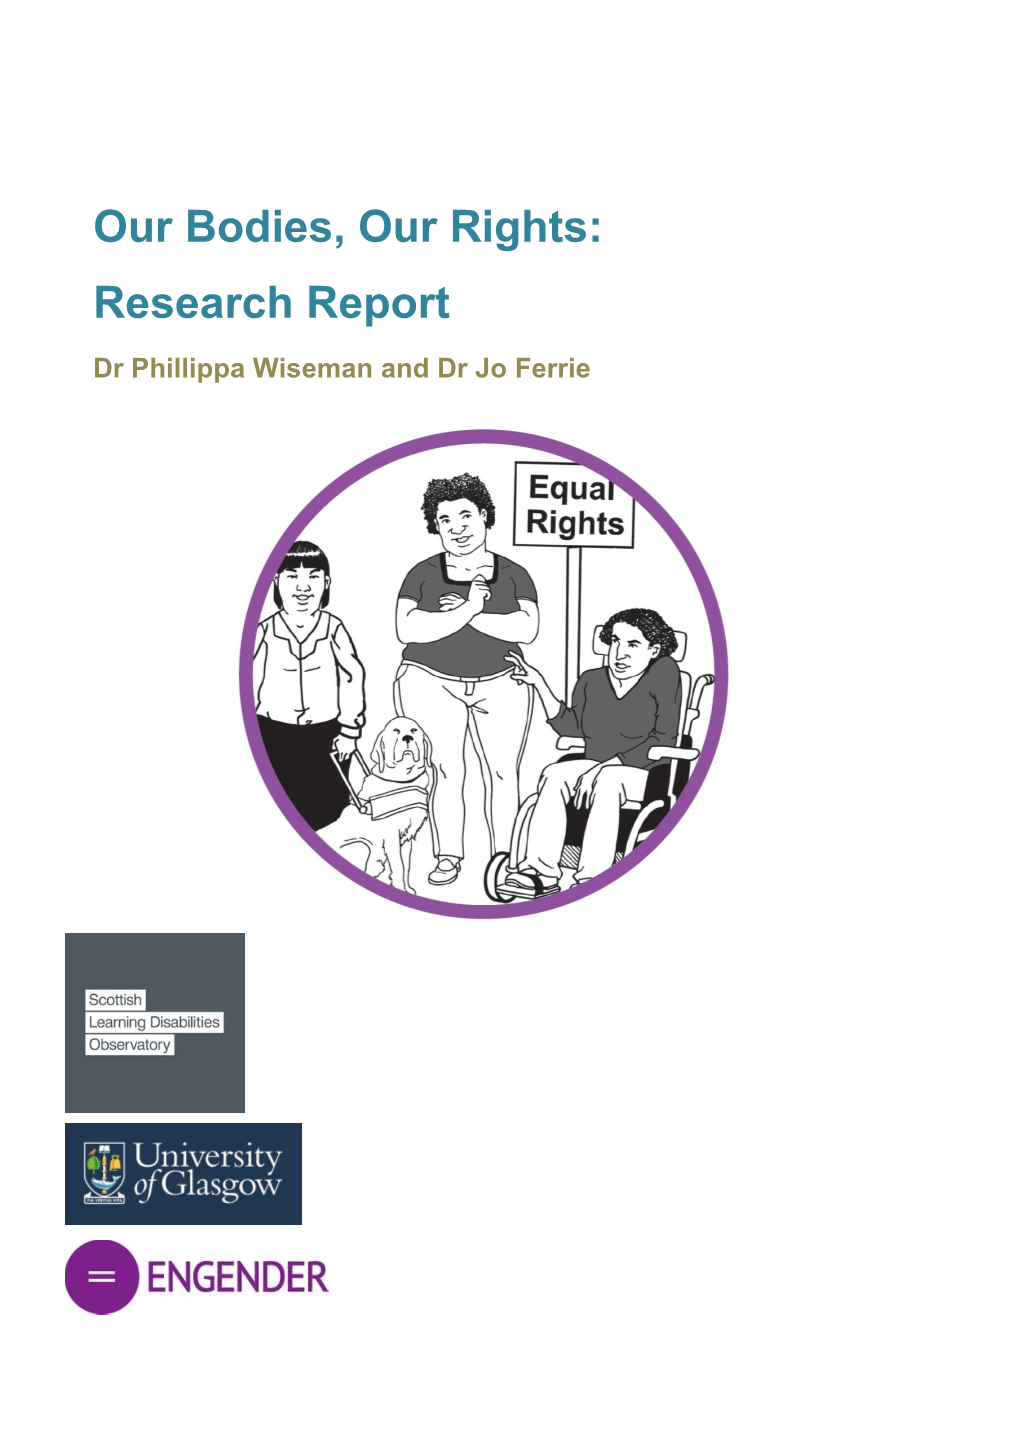 Our Bodies, Our Rights: Research Report